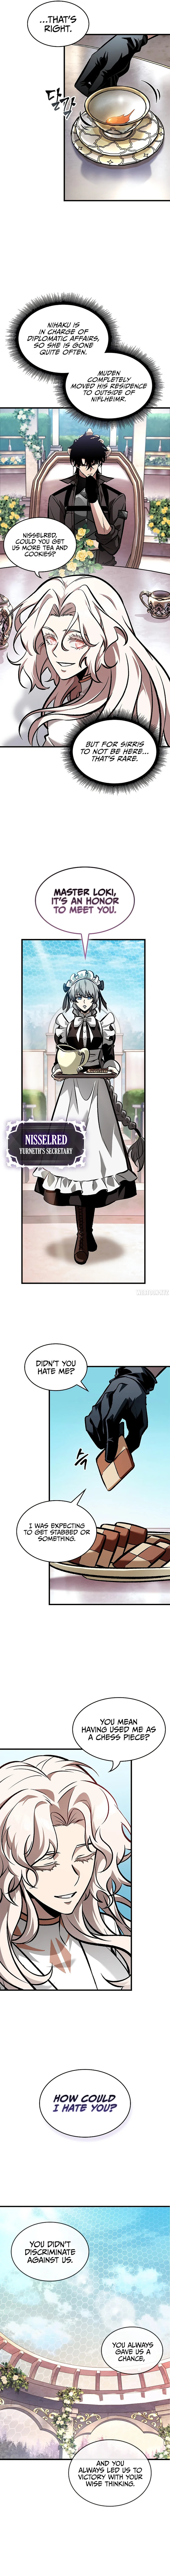 Pick Me Up - Chapter 82 Page 10